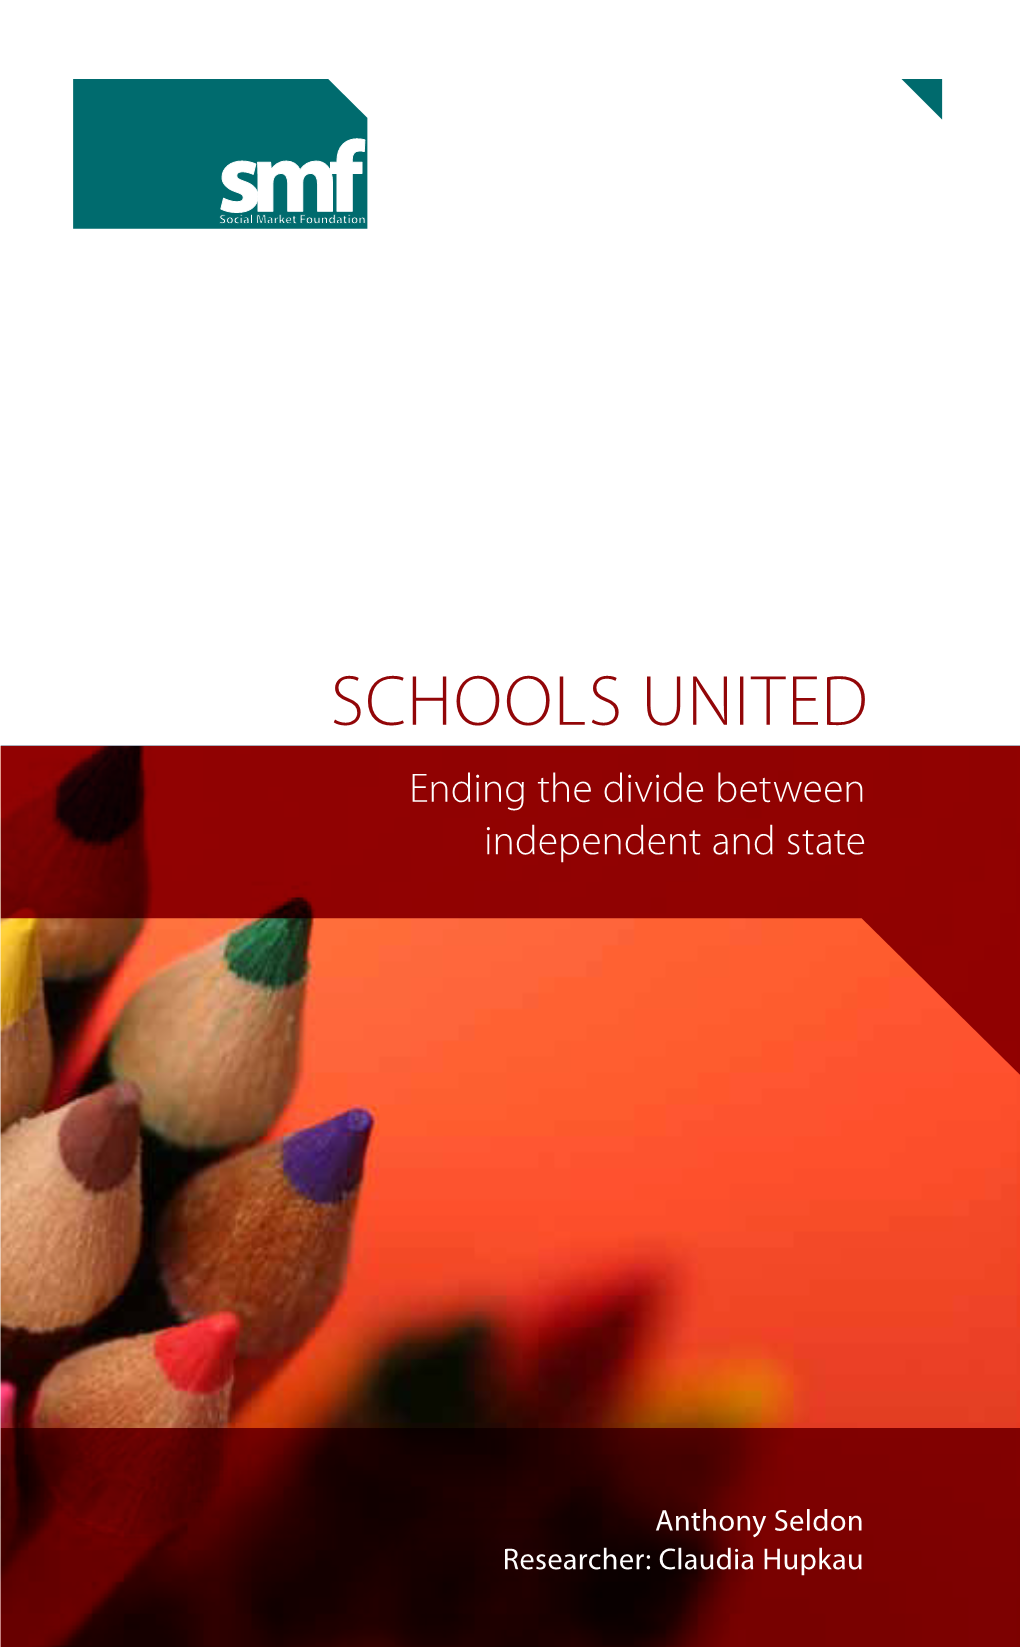 SCHOOLS UNITED Ending the Divide Between Independent and State